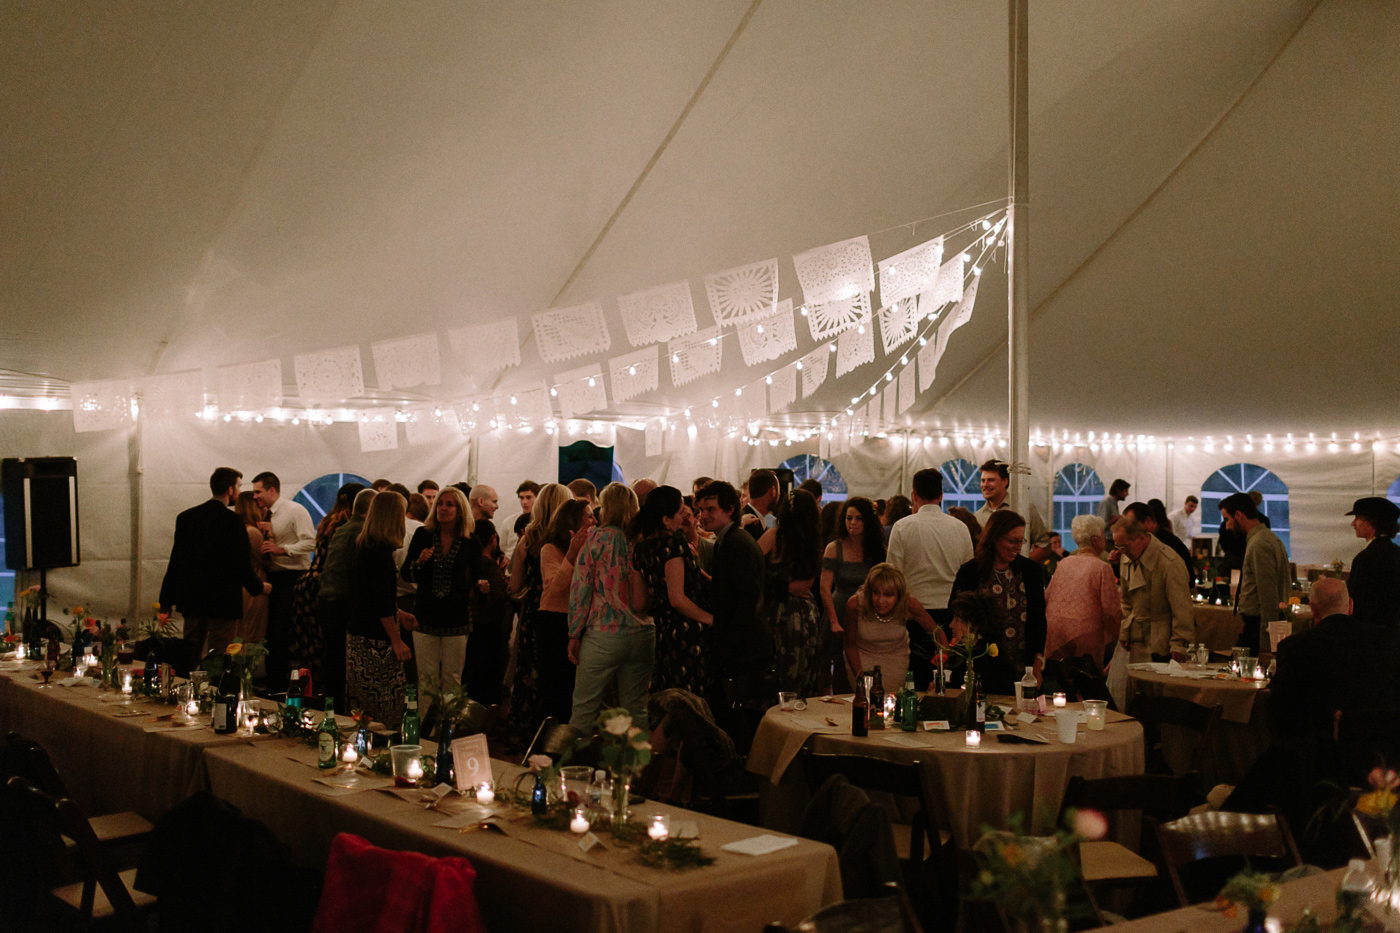 Reception in tent